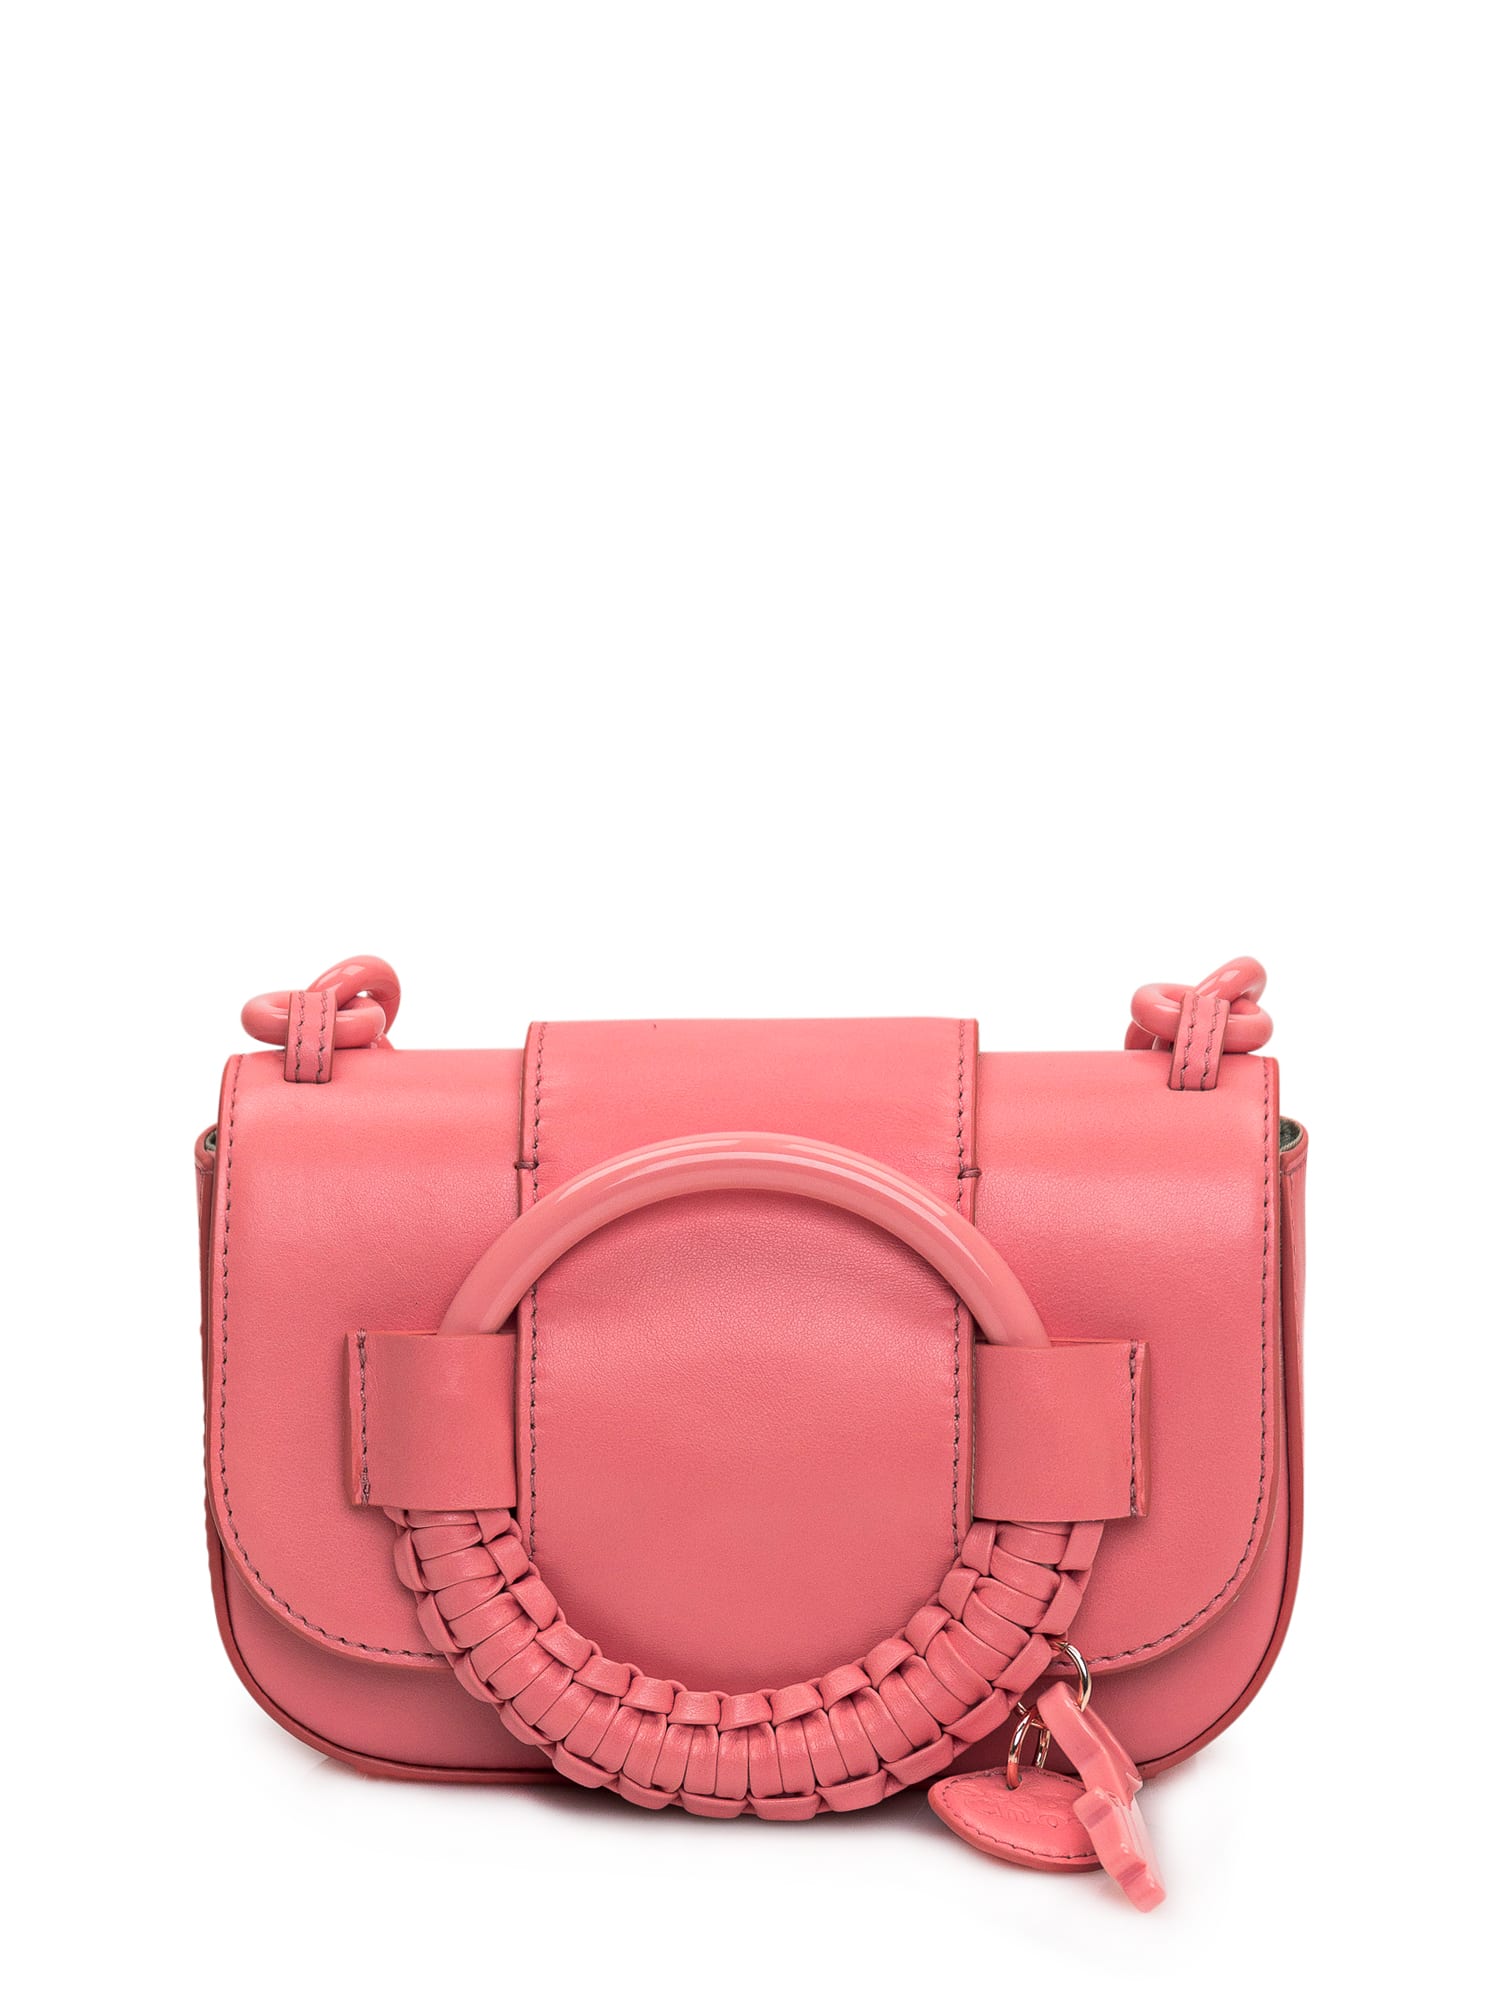 See By Chloé Hana Bag In Sunset Pink